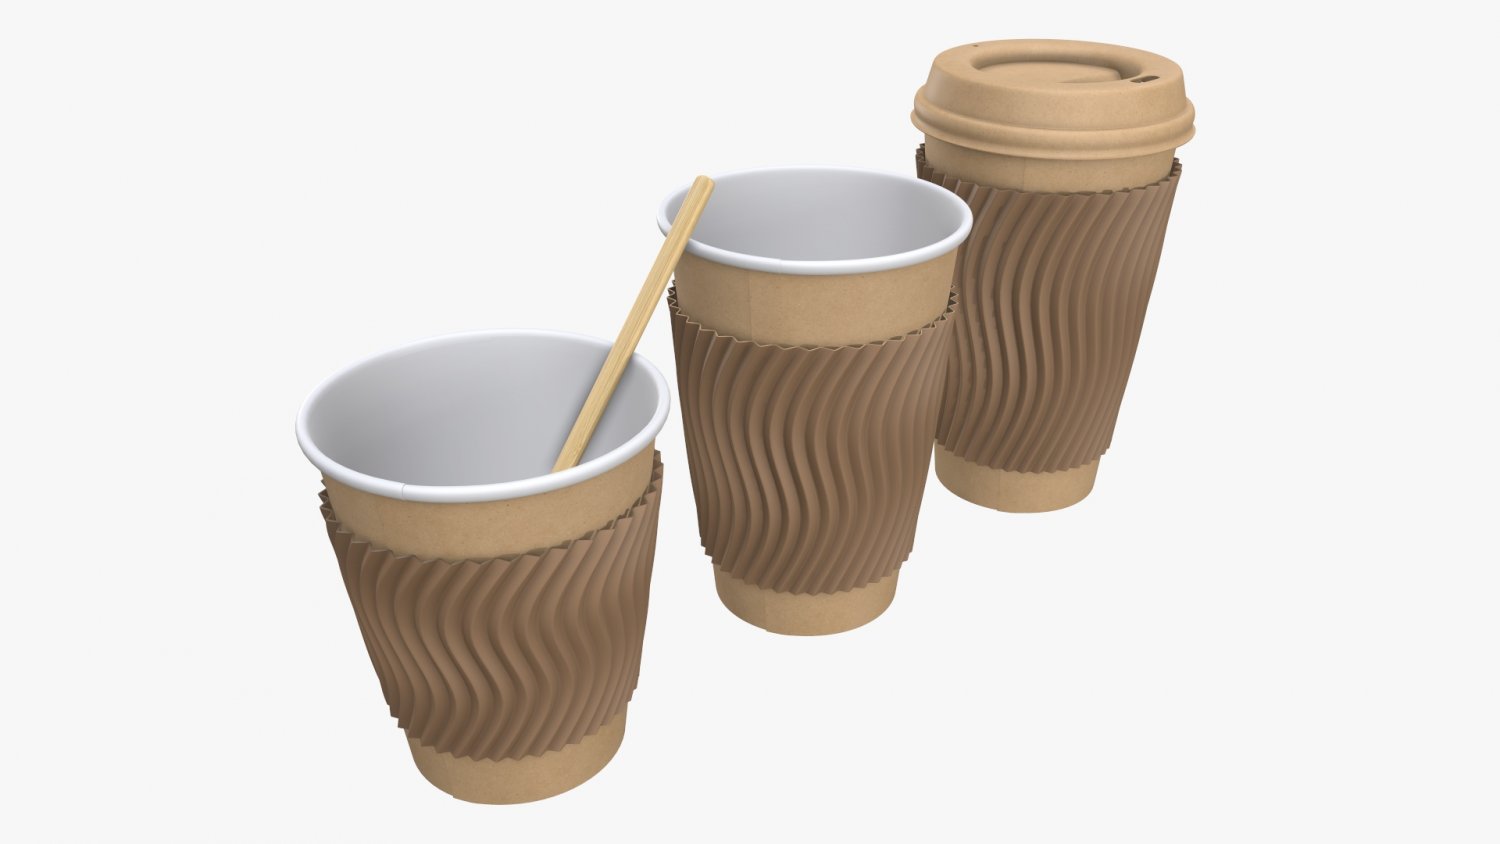 https://netrinoimages.s3.eu-west-2.amazonaws.com/2017/03/16/140444/277309/biodegradable_paper_coffee_cup_with_sleeve_and_cardboard_lid_3d_model_c4d_max_obj_fbx_ma_lwo_3ds_3dm_stl_2901105_o.jpg